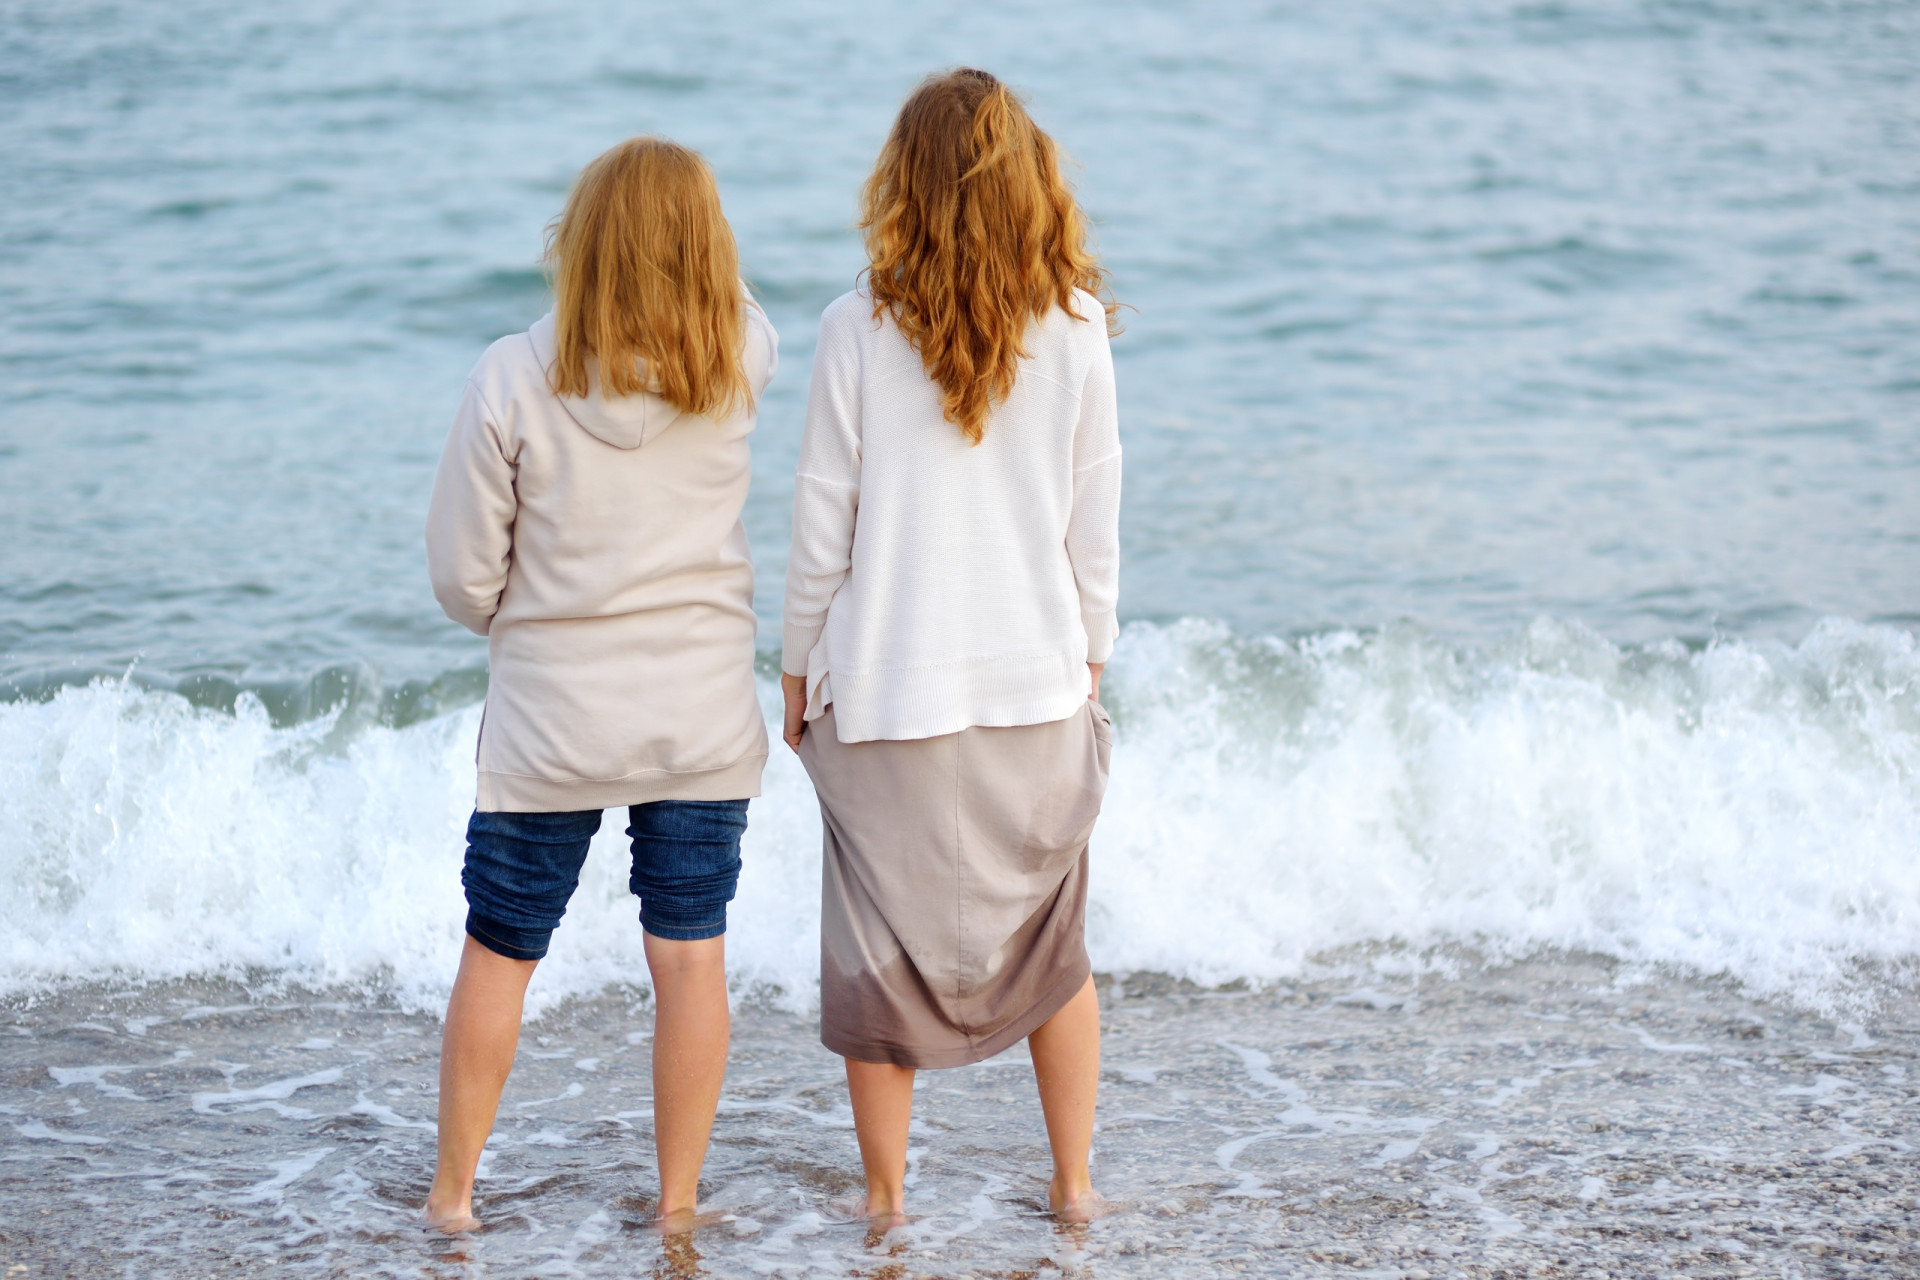 <p>Soak up some sun with mom this Mother’s Day at the beach while enjoying the sound of crashing waves and just being in each other’s company.</p><p>You may also like:<a href="https://www.starsinsider.com/n/372958?utm_source=msn.com&utm_medium=display&utm_campaign=referral_description&utm_content=708861en-us"> Prince William: love, loss, and new looks over the years</a></p>